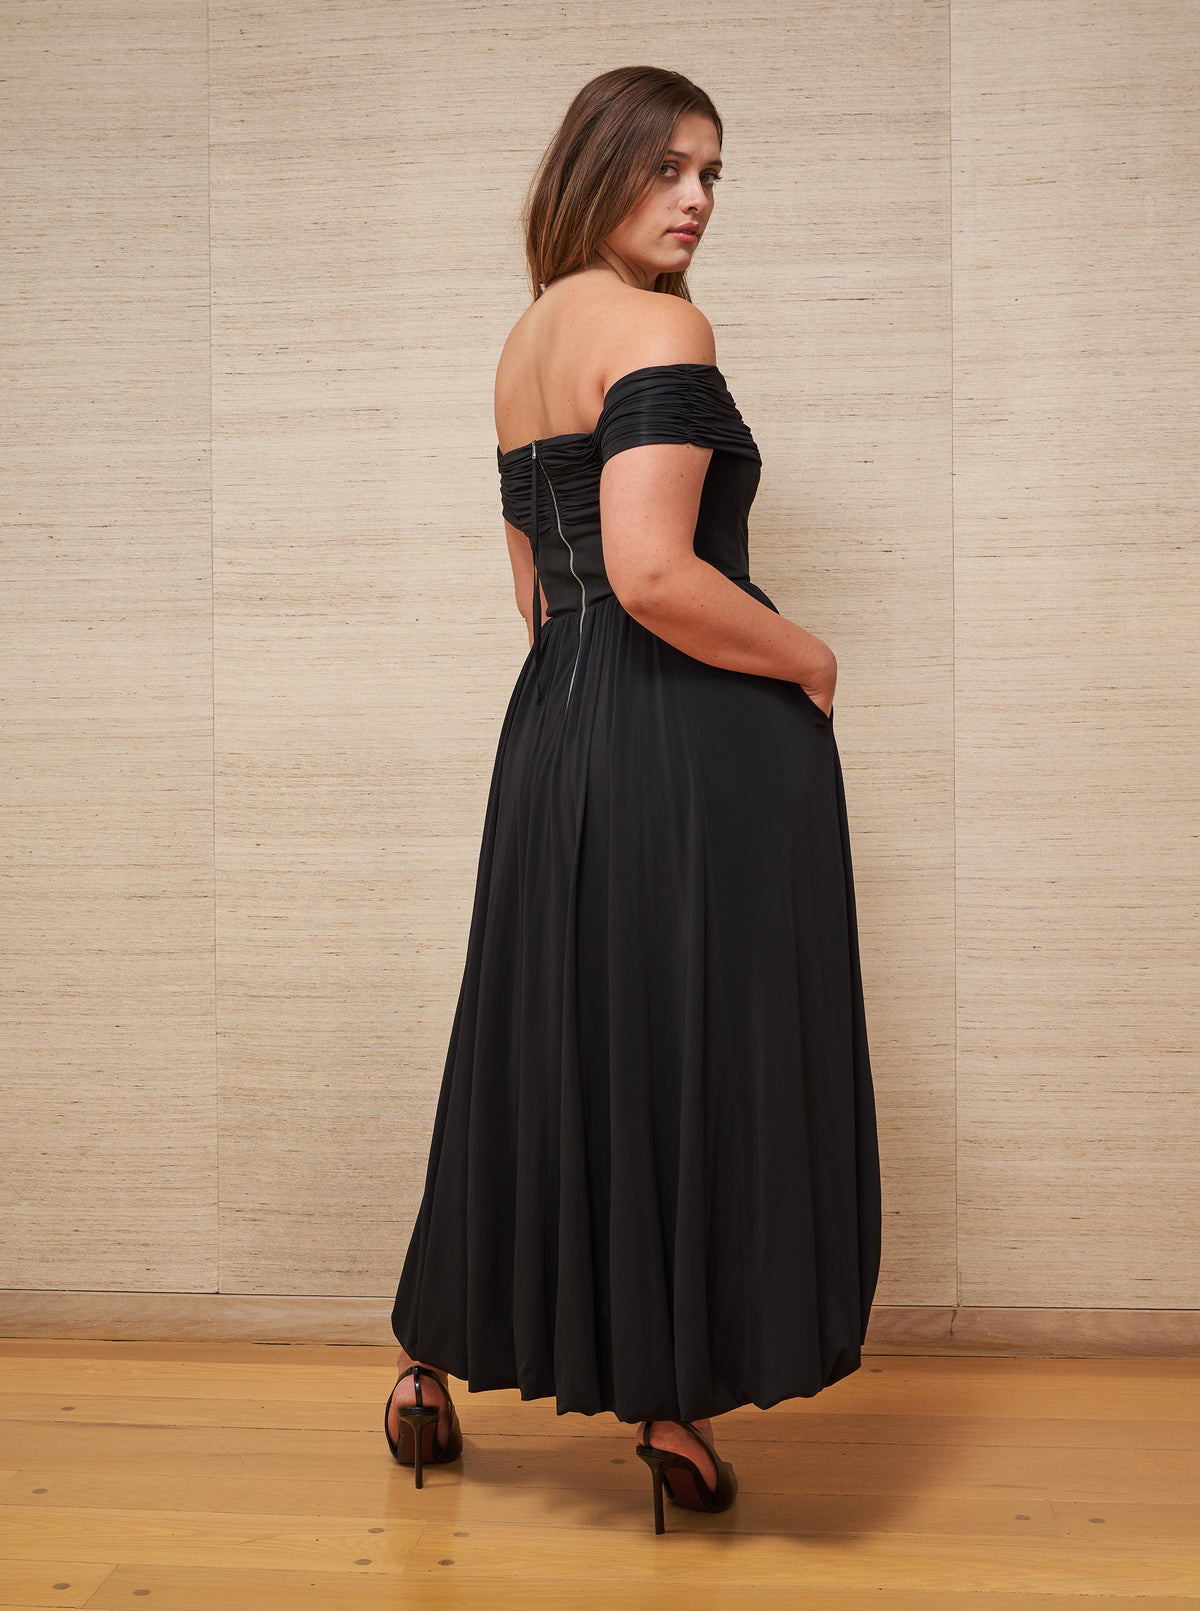 Channel your inner Grace Kelly and slip into this sleek, off-the-shoulder black dress with stretch bodice for the ultimate perfect fit.